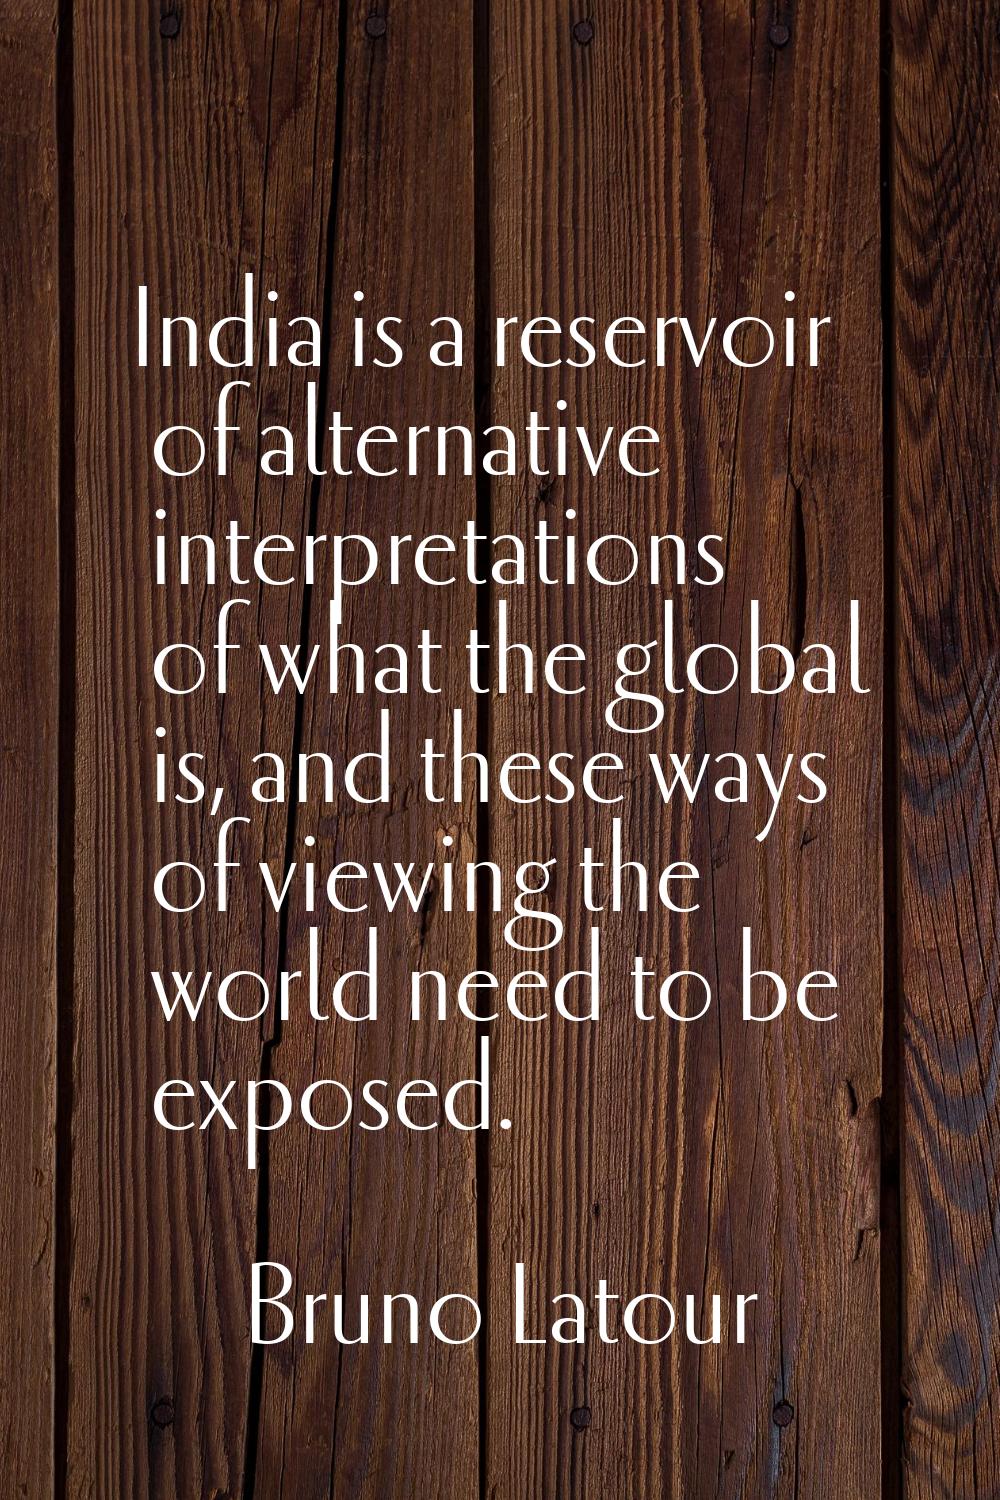 India is a reservoir of alternative interpretations of what the global is, and these ways of viewin